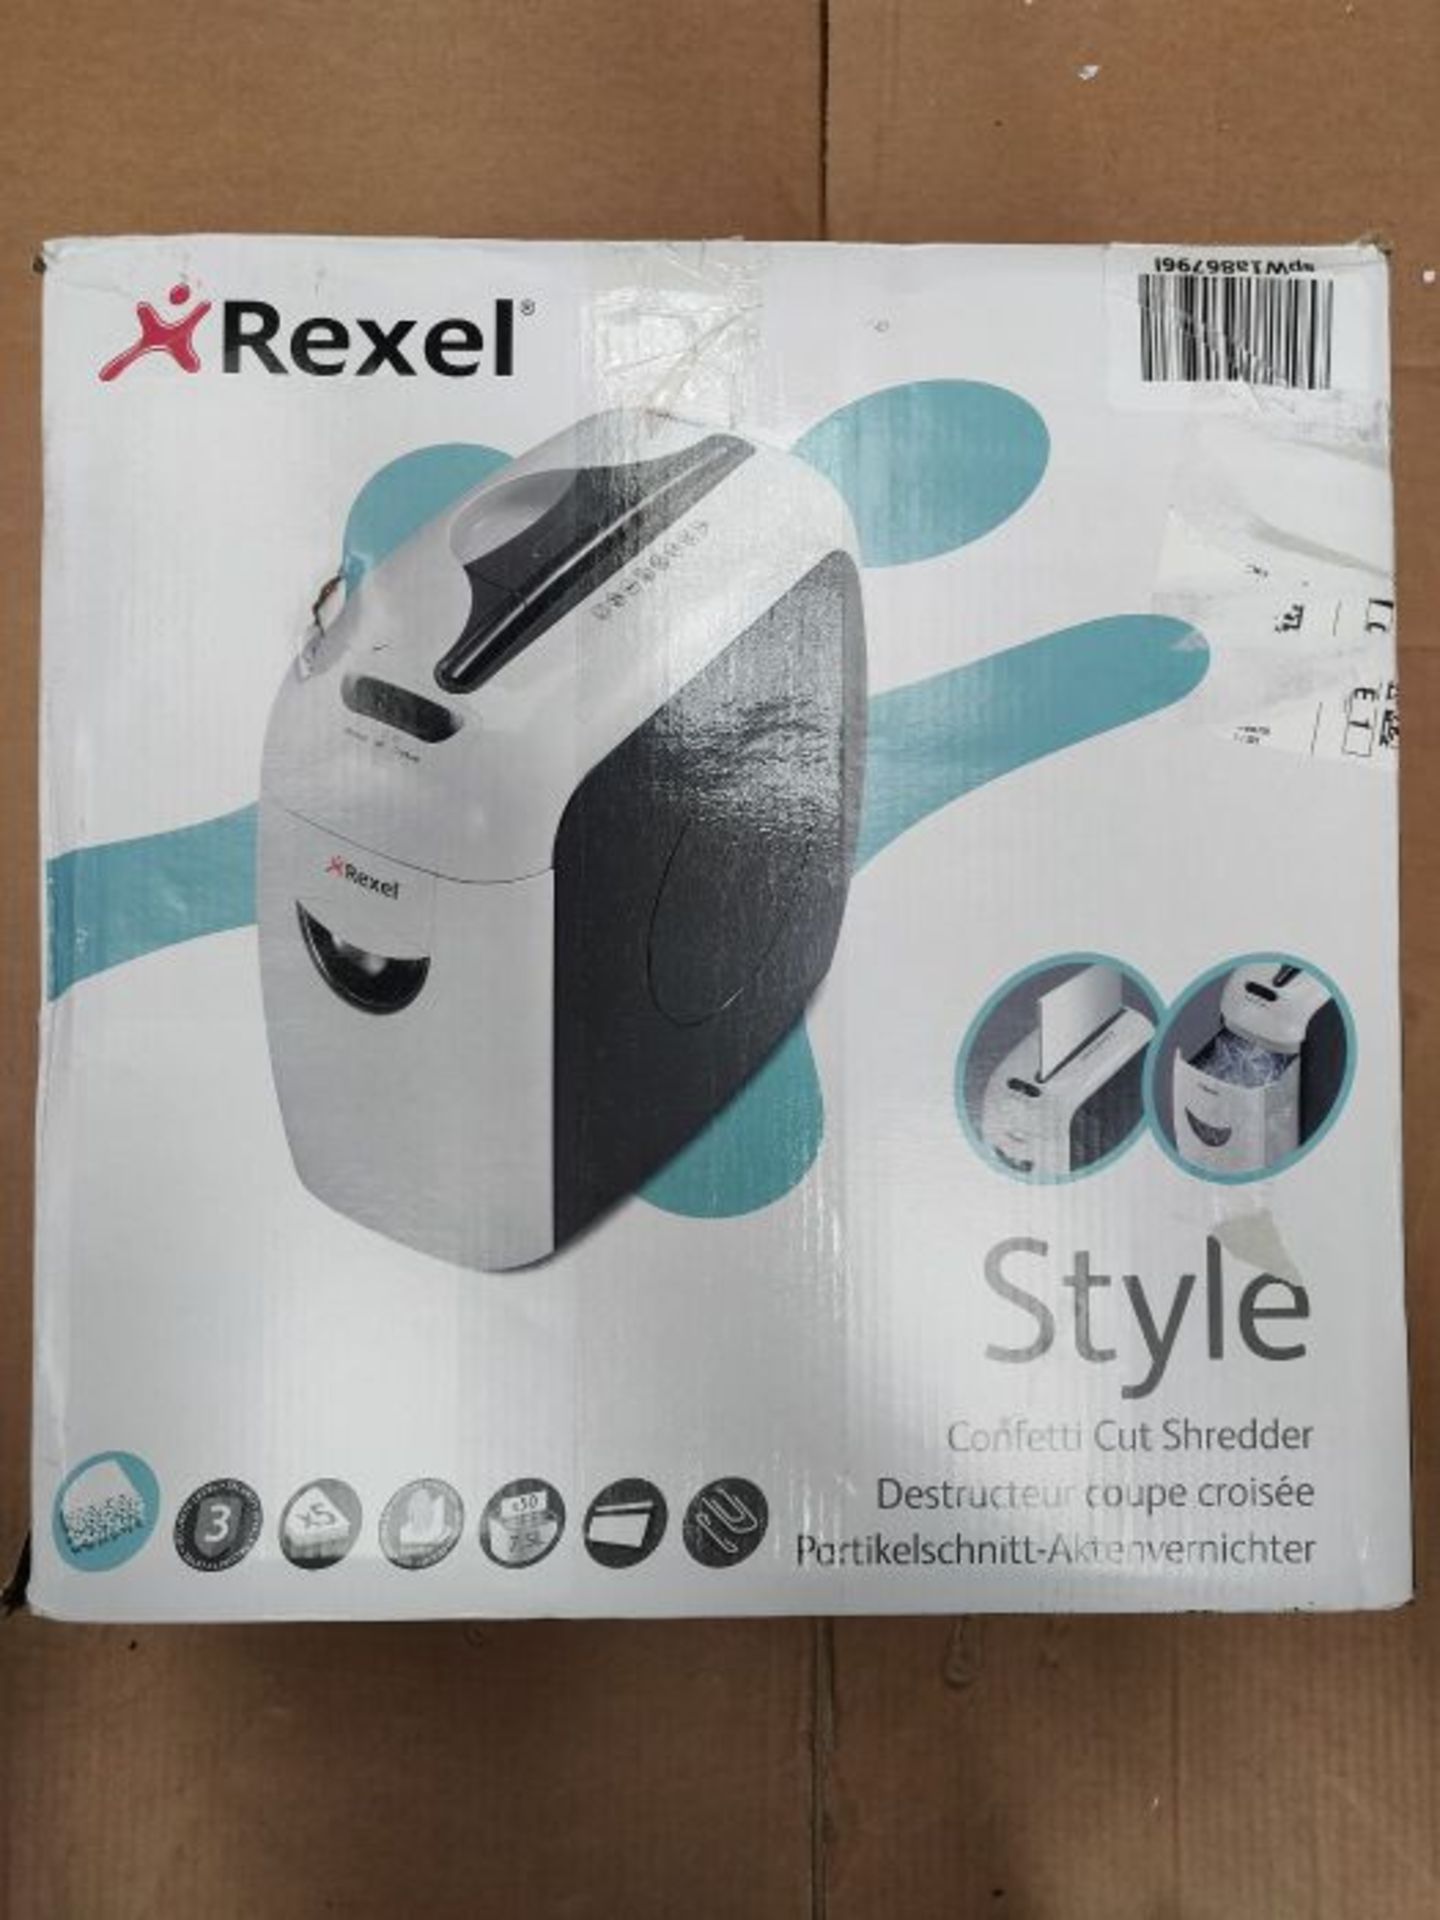 Rexel 2101942UK Style 5 Sheet Manual Cross Cut Shredder for Home or Small Office Use,